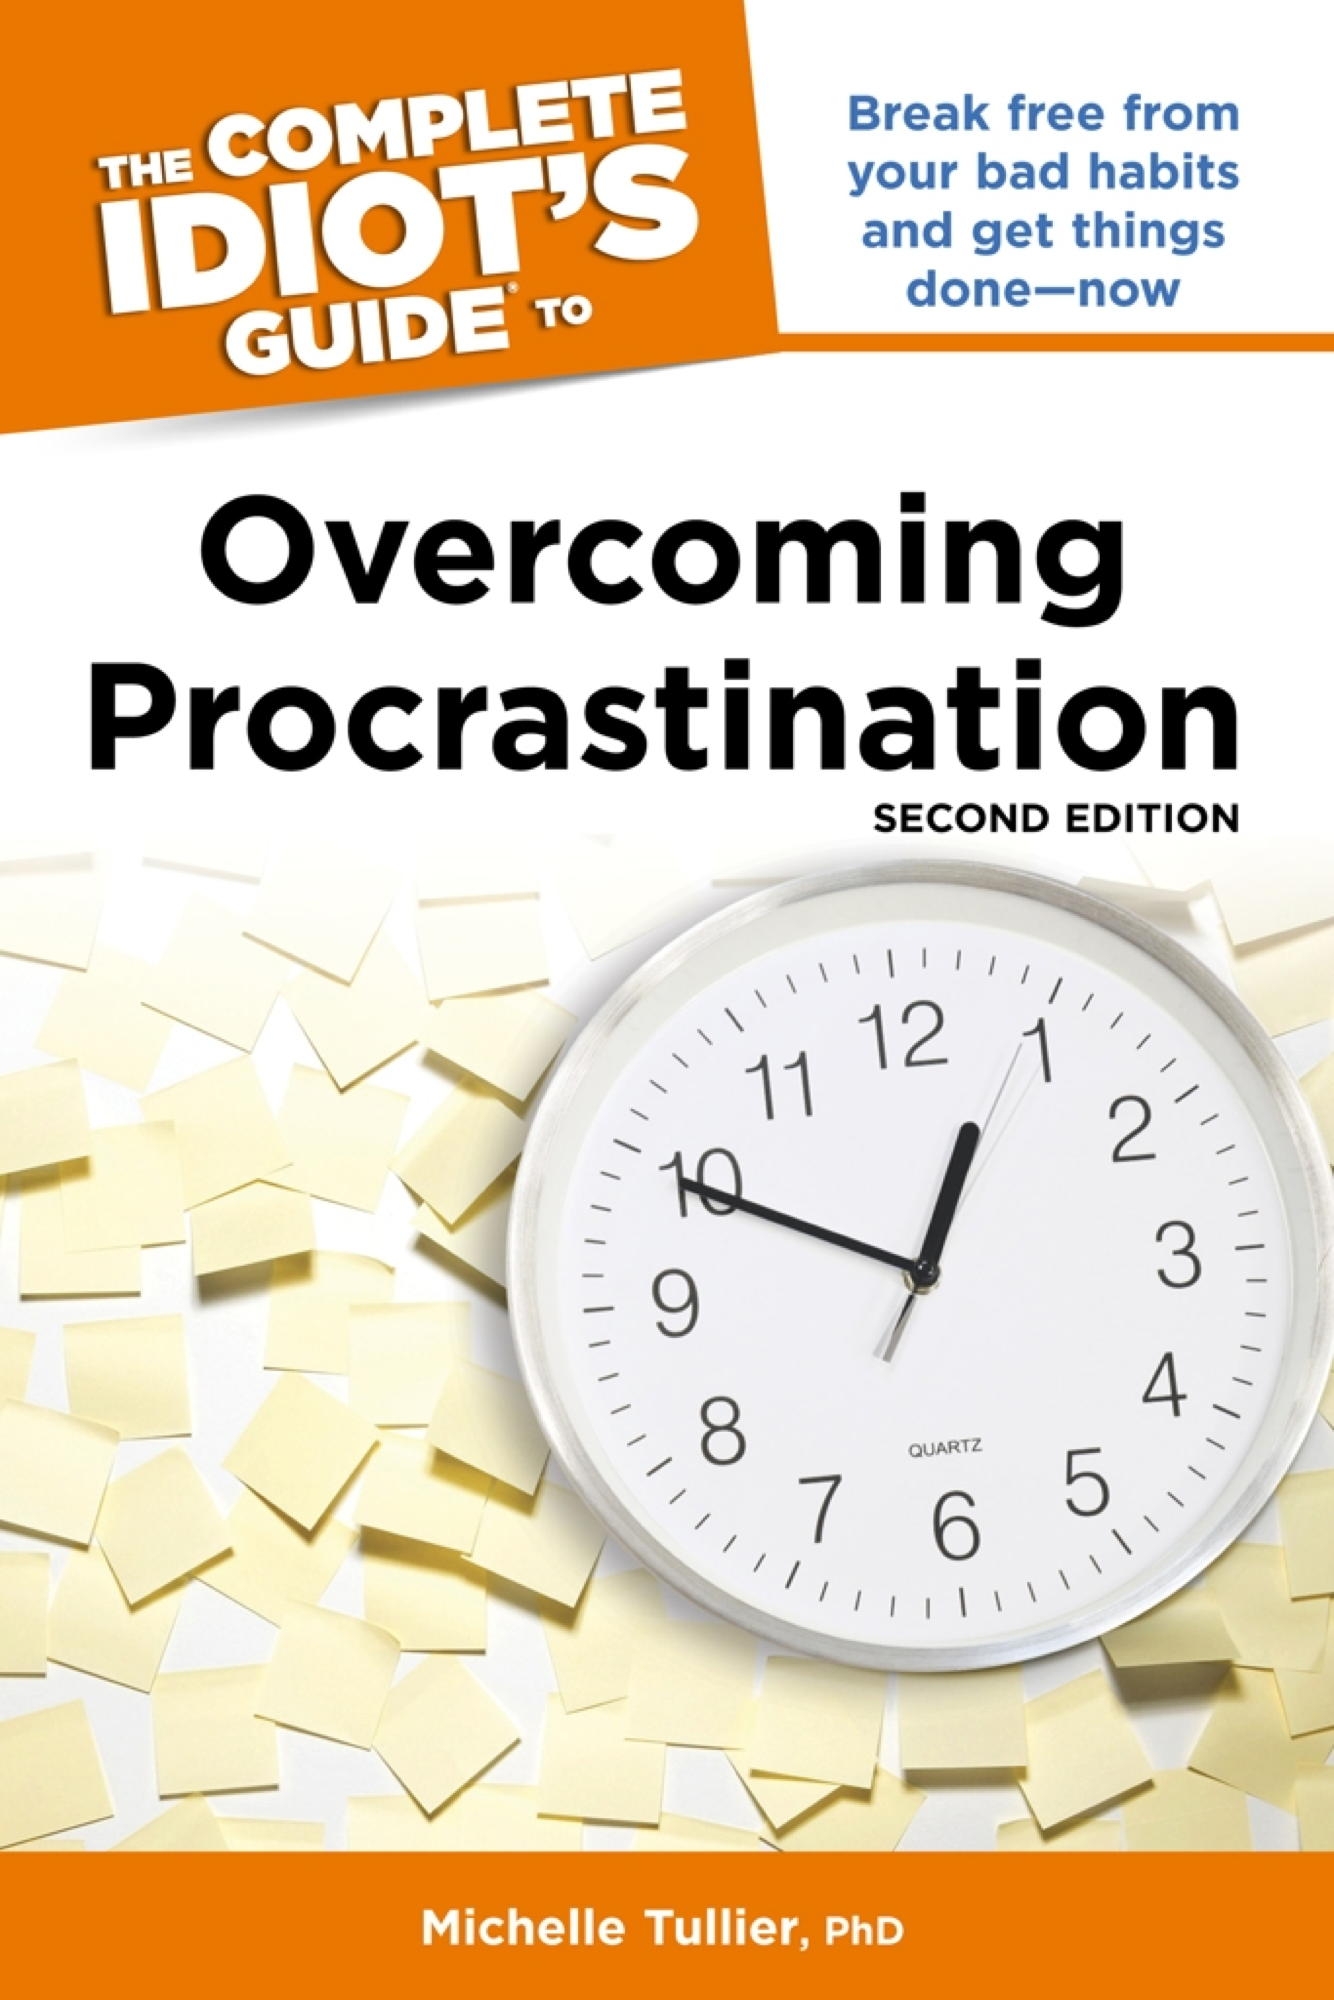 The Complete Idiot's Guide to Overcoming Procrastination, 2nd Edition